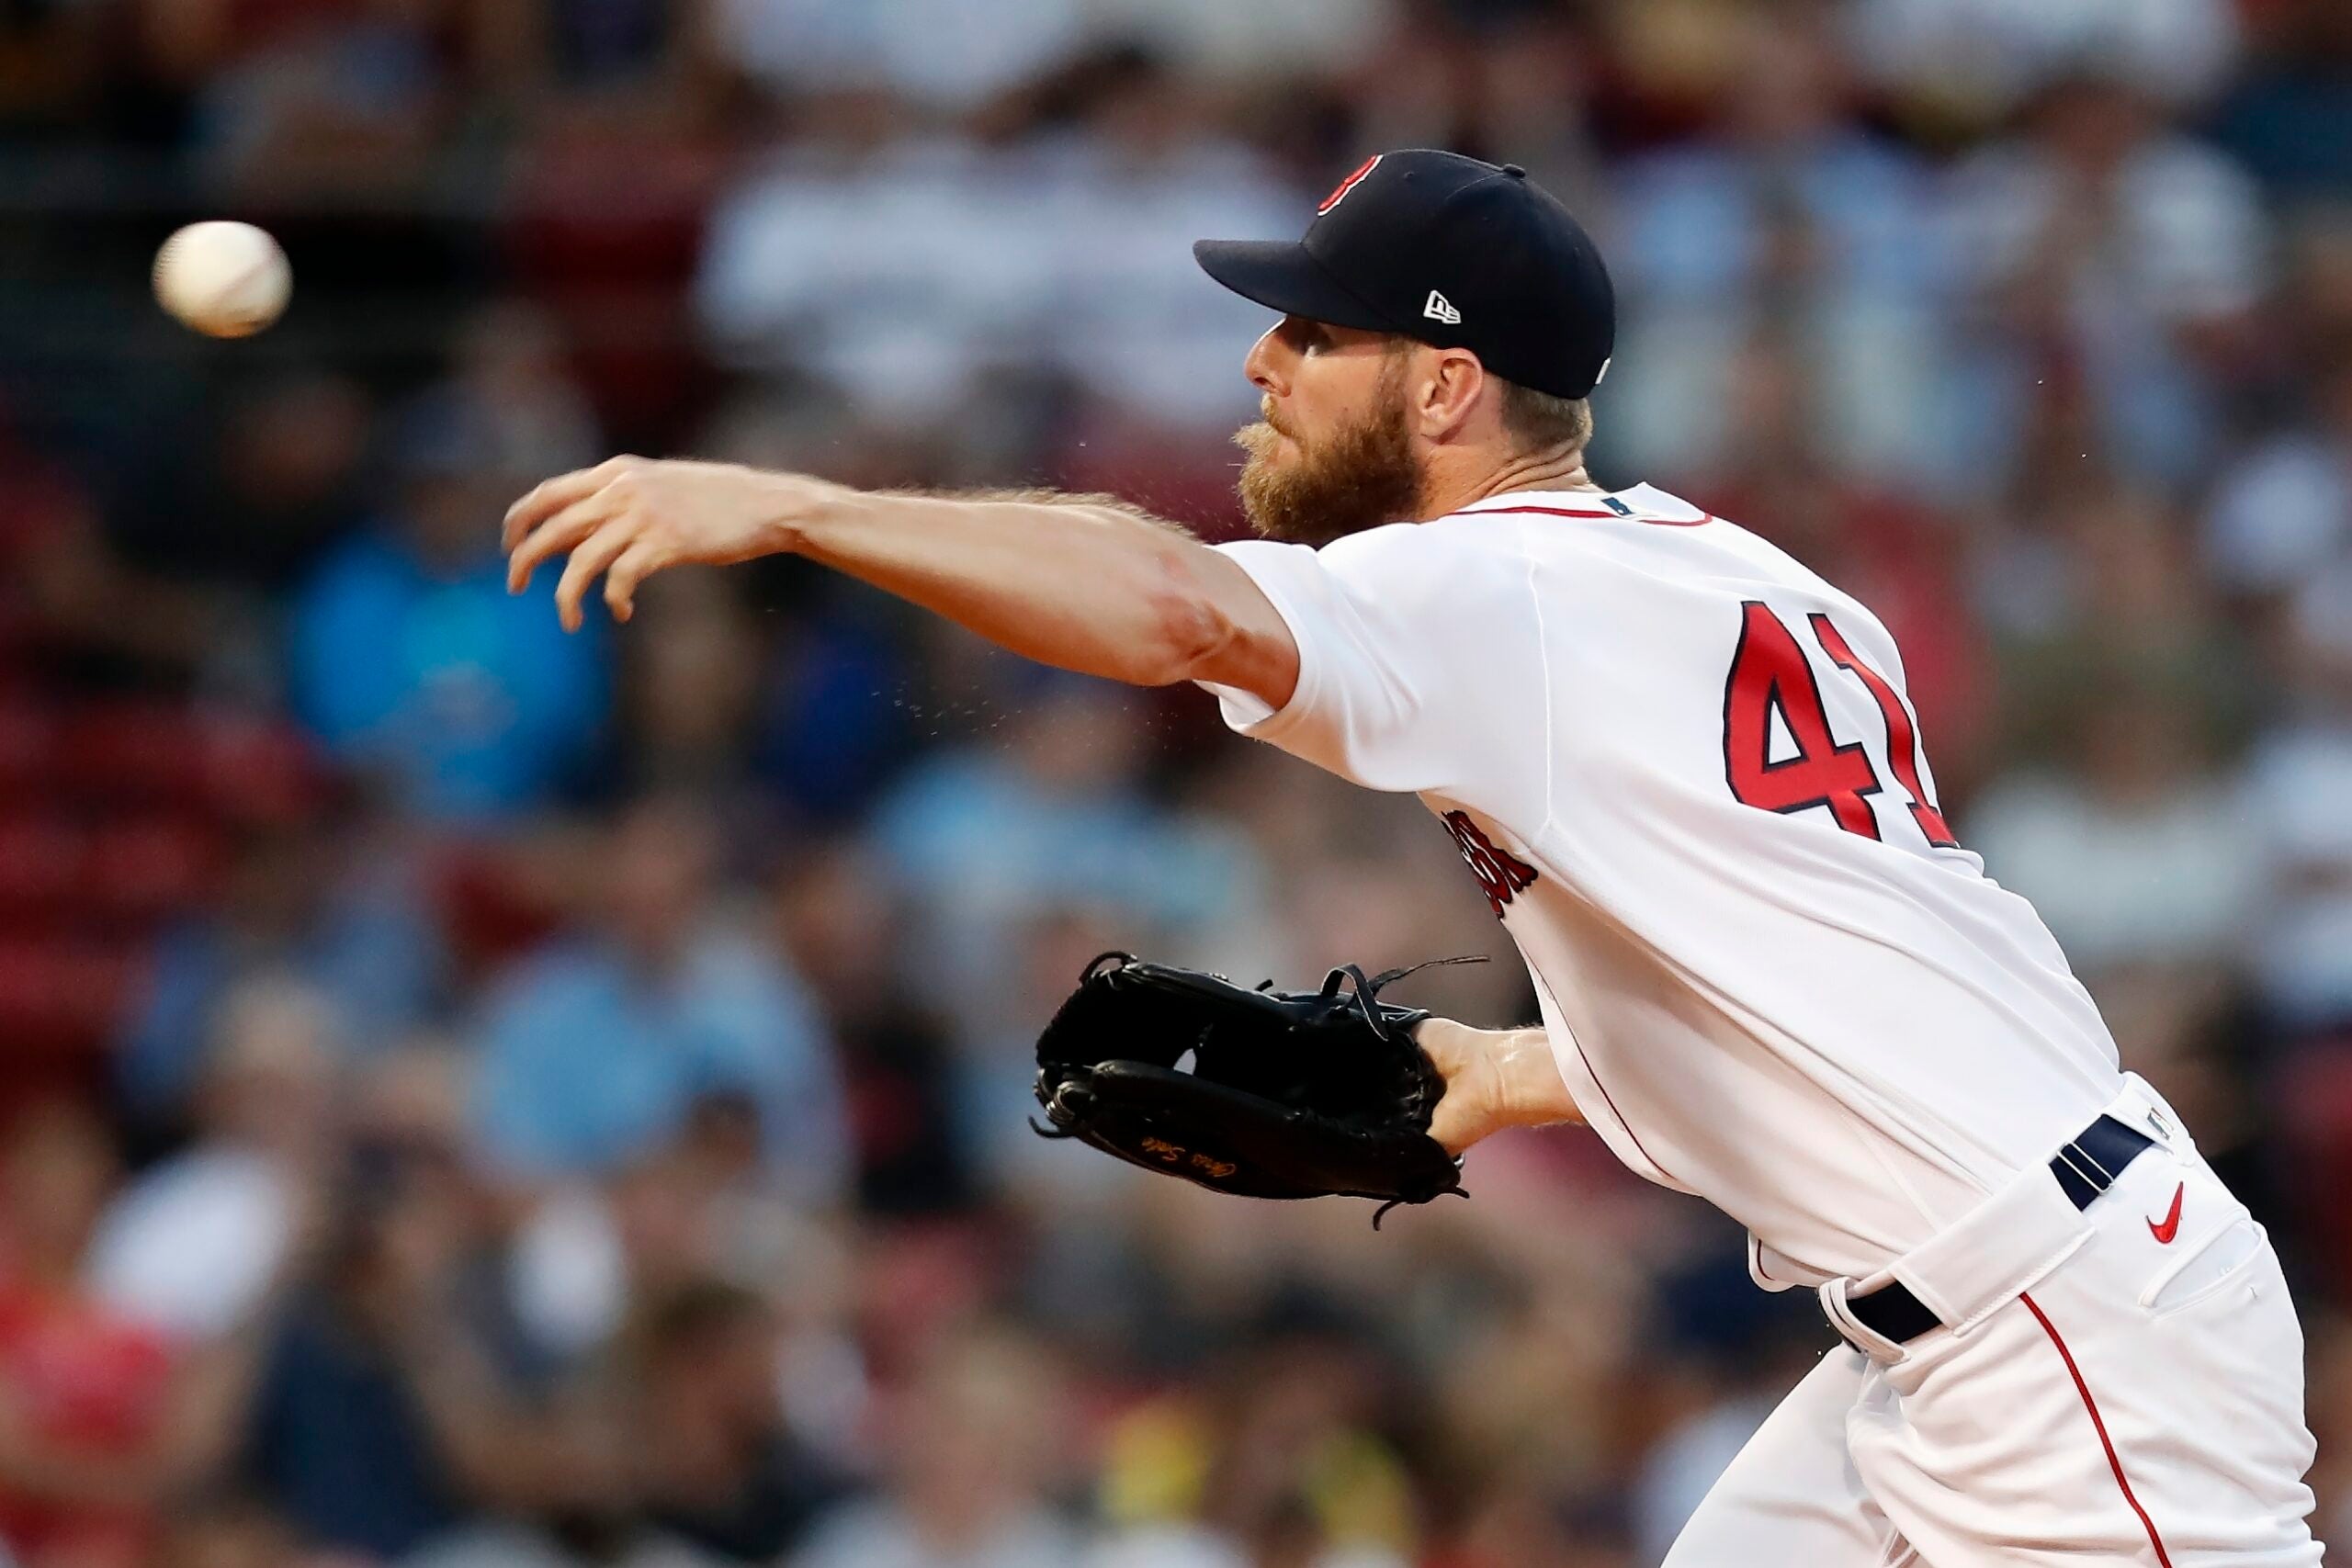 Chris Sale joins Sandy Koufax as only pitchers with 3 immaculate